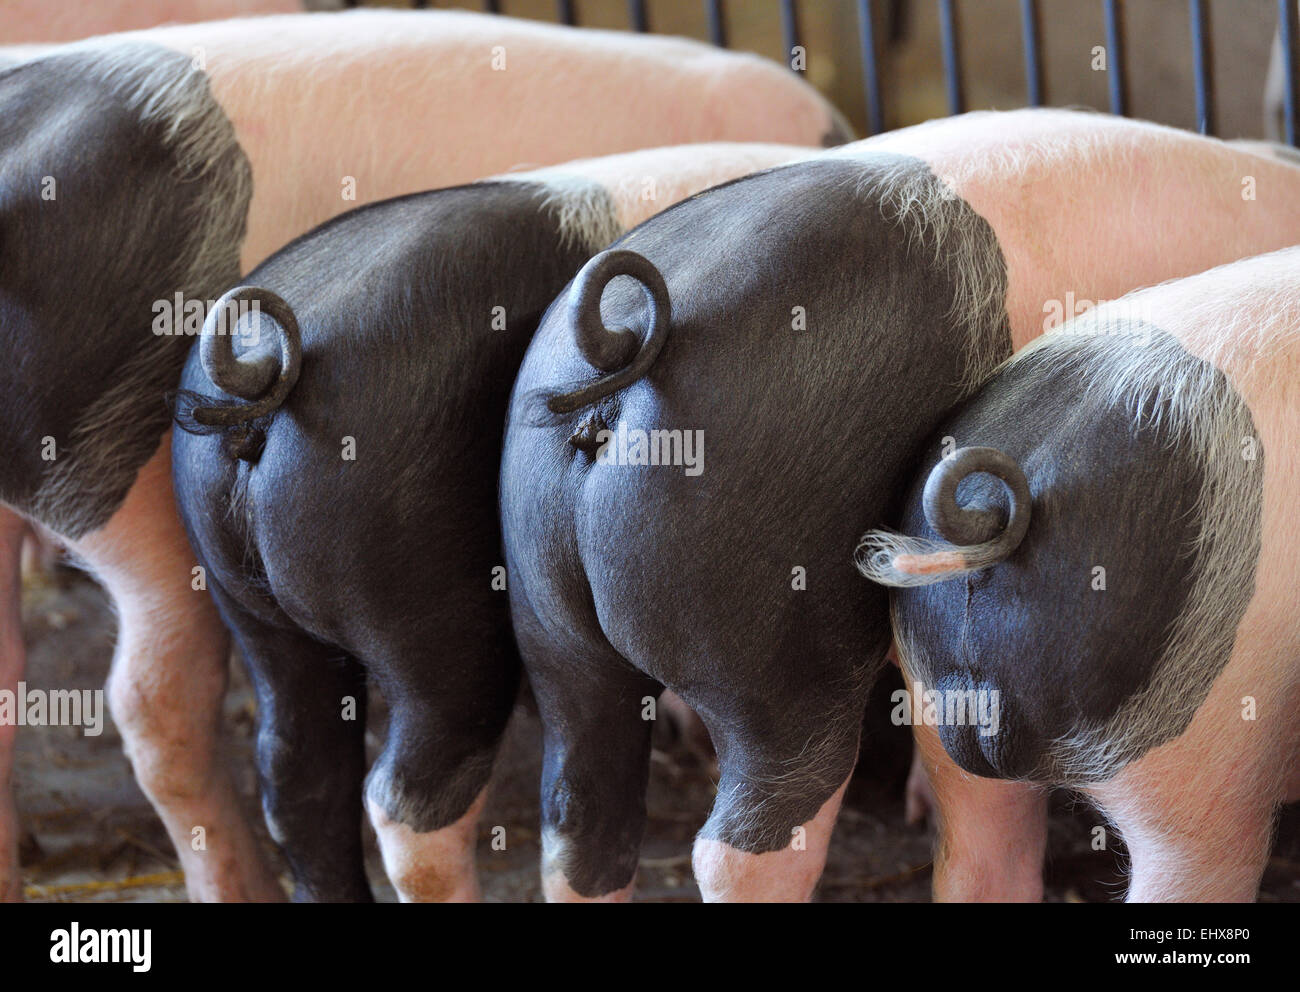 Pigs (Sus srofa domestica) from behind, Germany Stock Photo